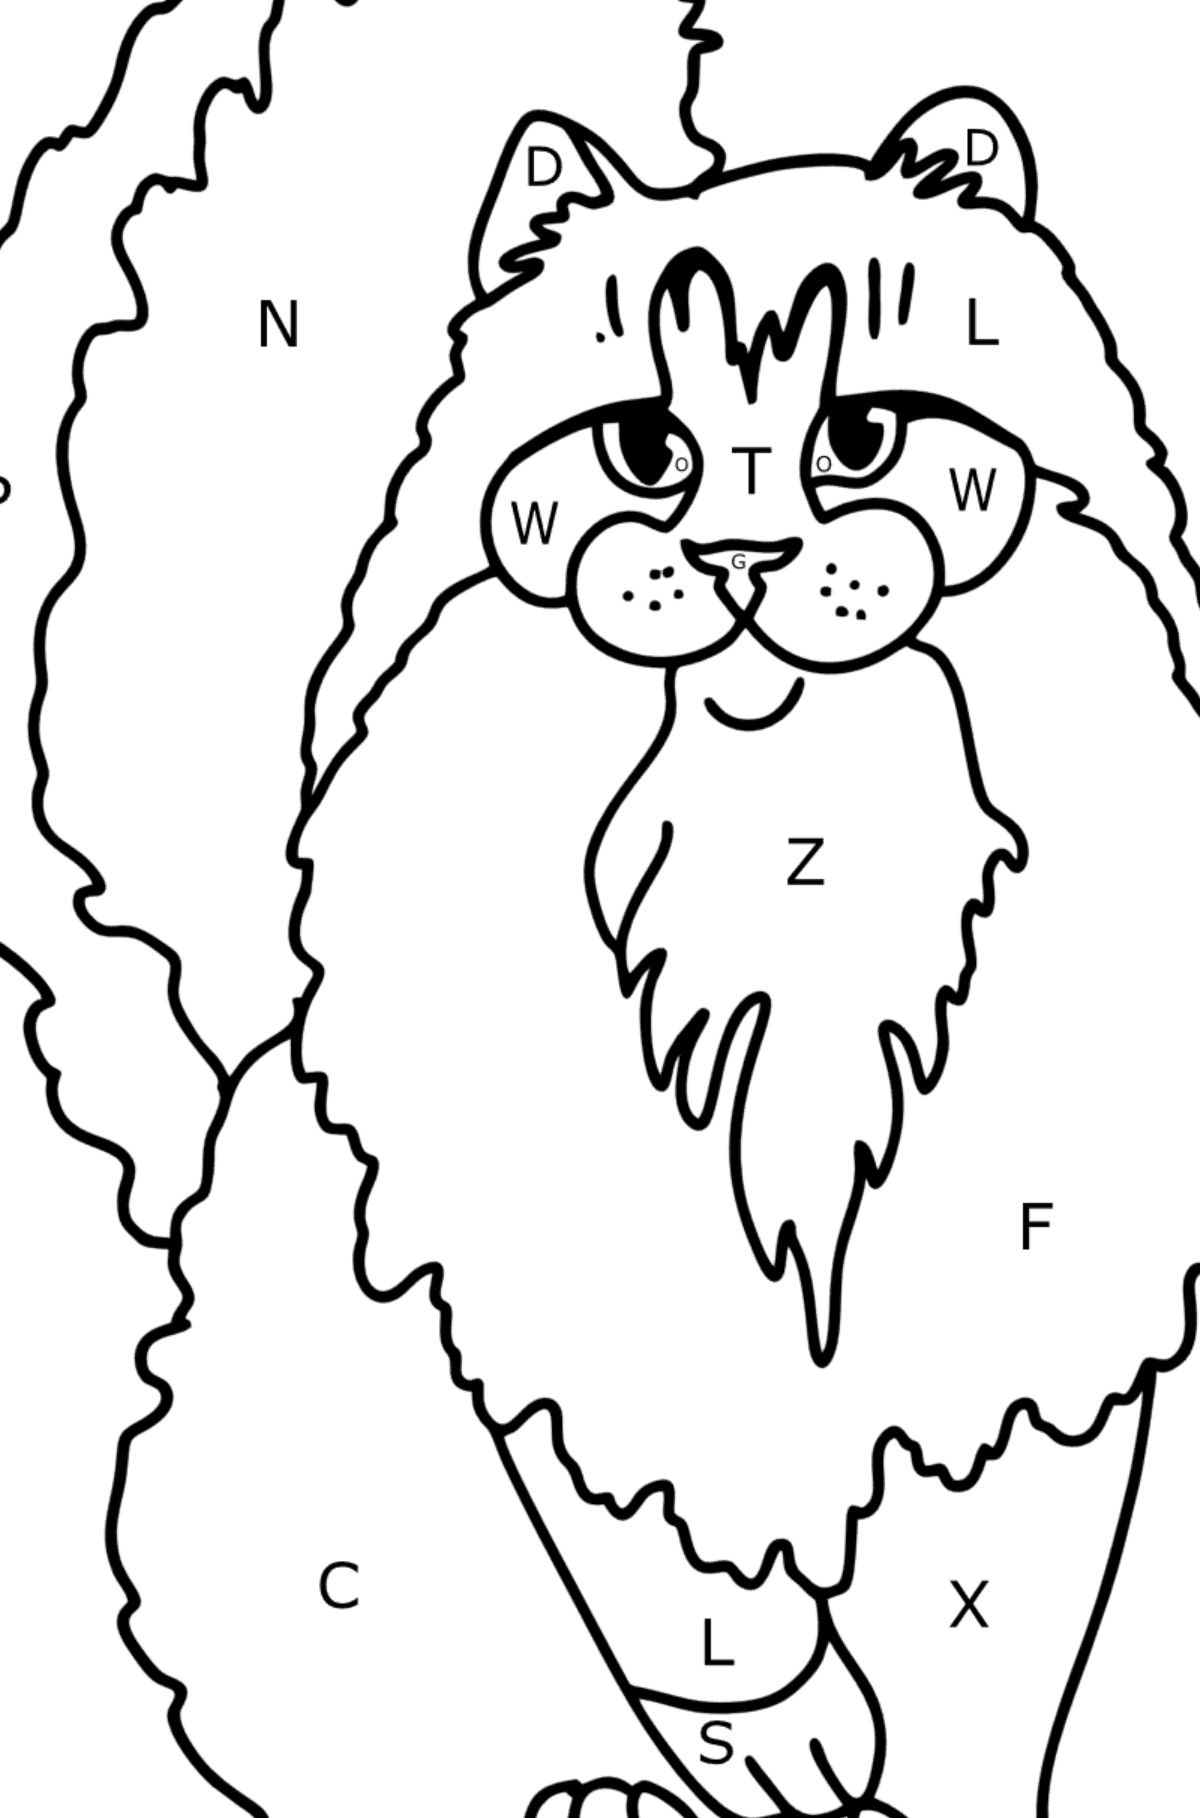 Norwegian Forest Cat coloring page - Coloring by Letters for Kids